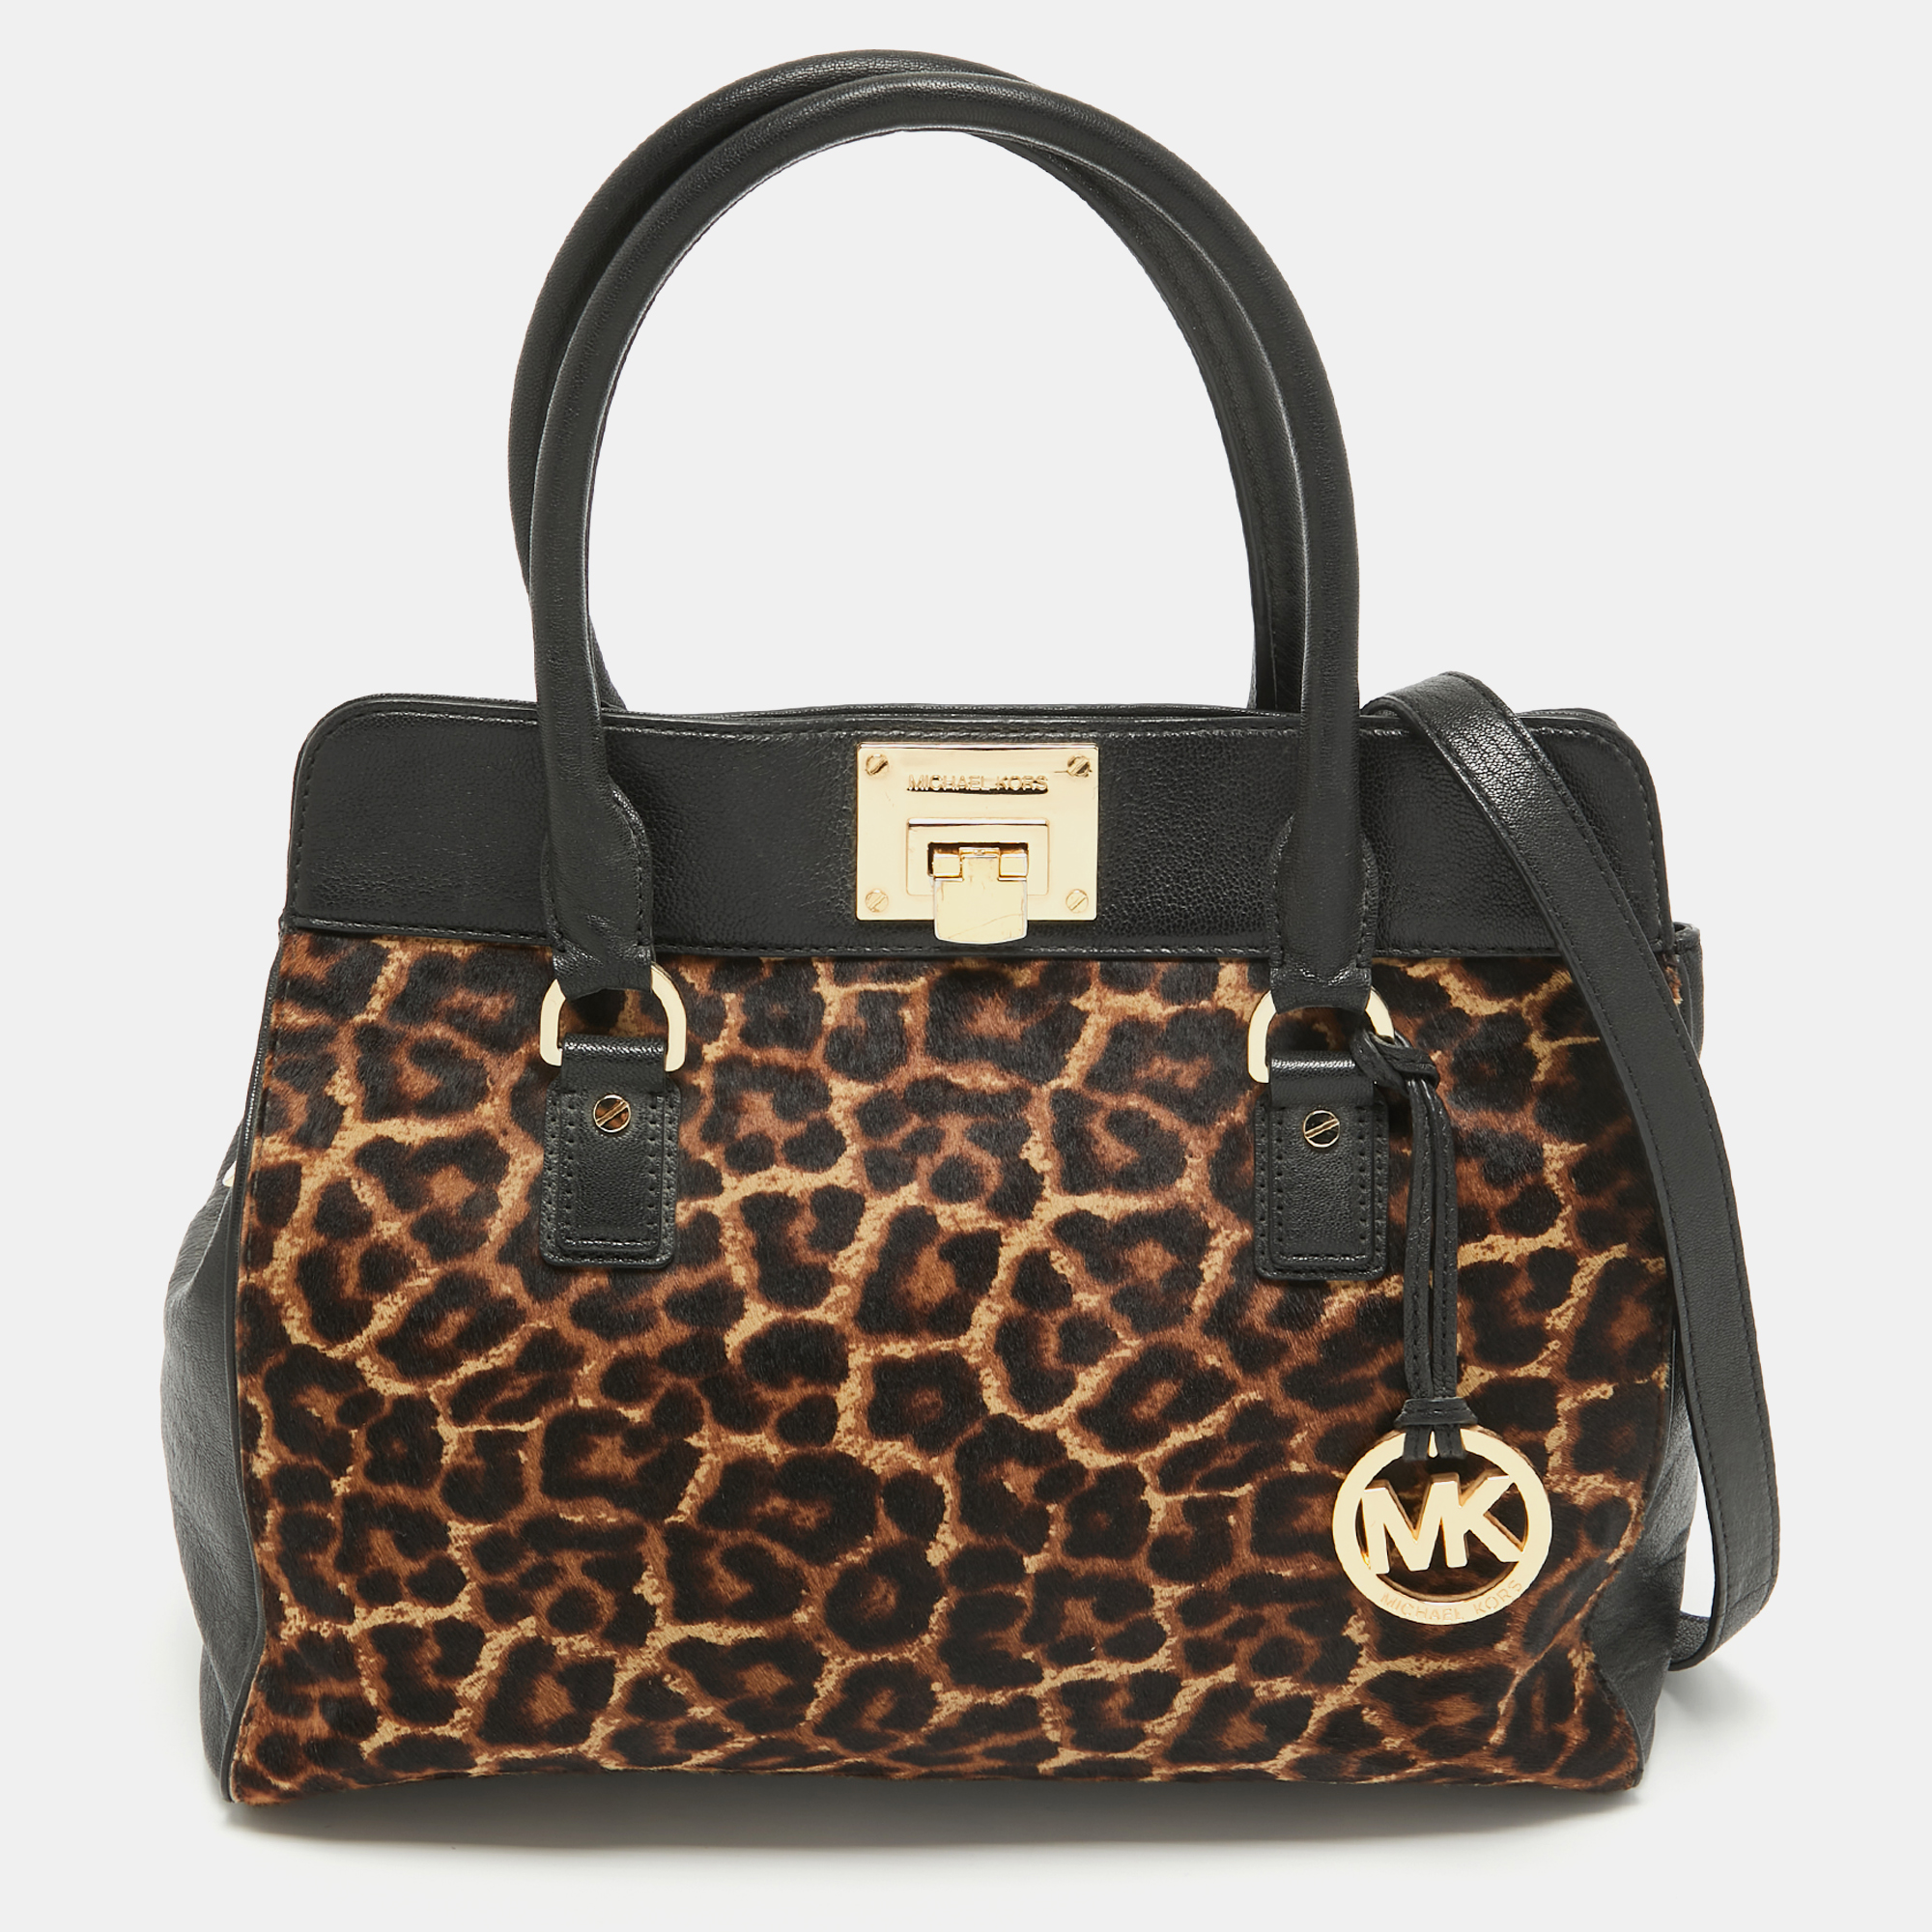 

MICHAEL Michael Kors Black/Brown Leopard Print Calfhair and Leather Astrid Tote